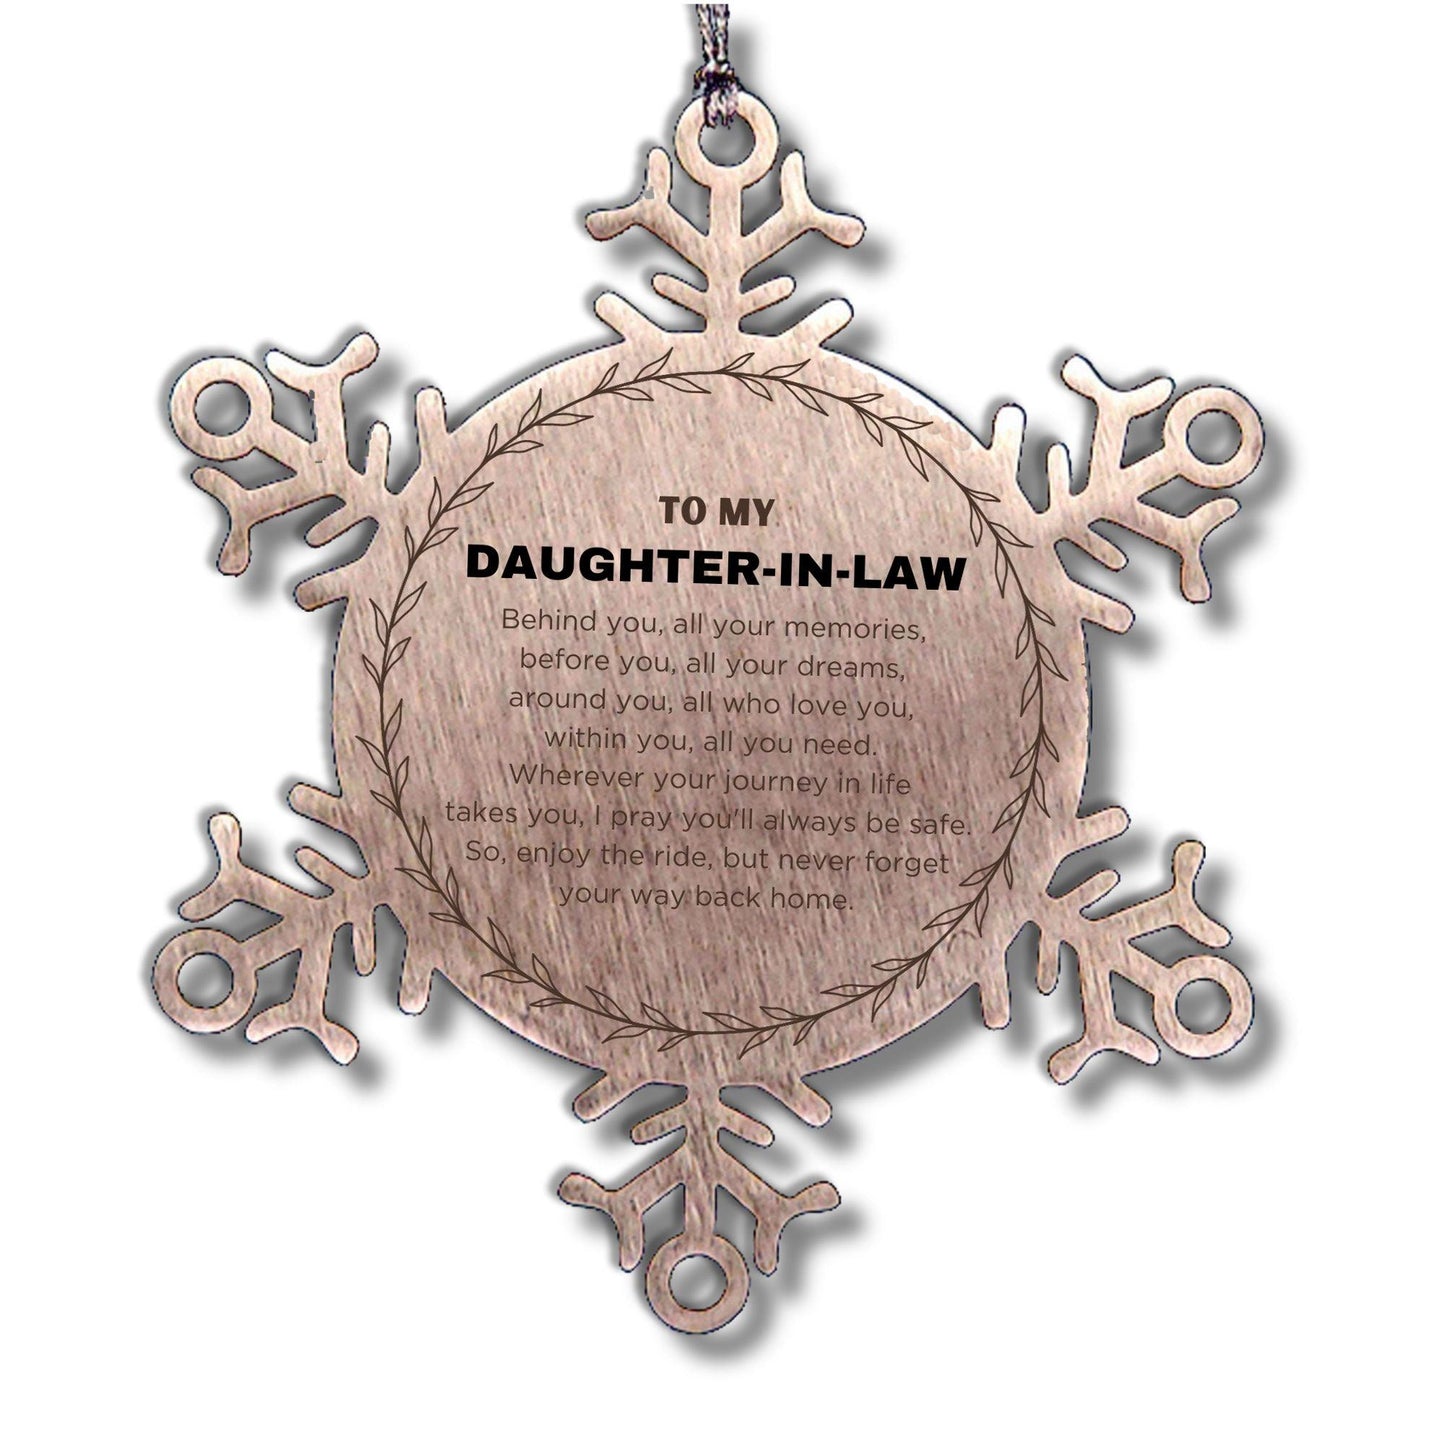 Inspirational Daughter-in-law Snowflake Ornament - Behind you, all your Memories, Before you, all your Dreams - Birthday, Christmas Holiday Gifts - Mallard Moon Gift Shop